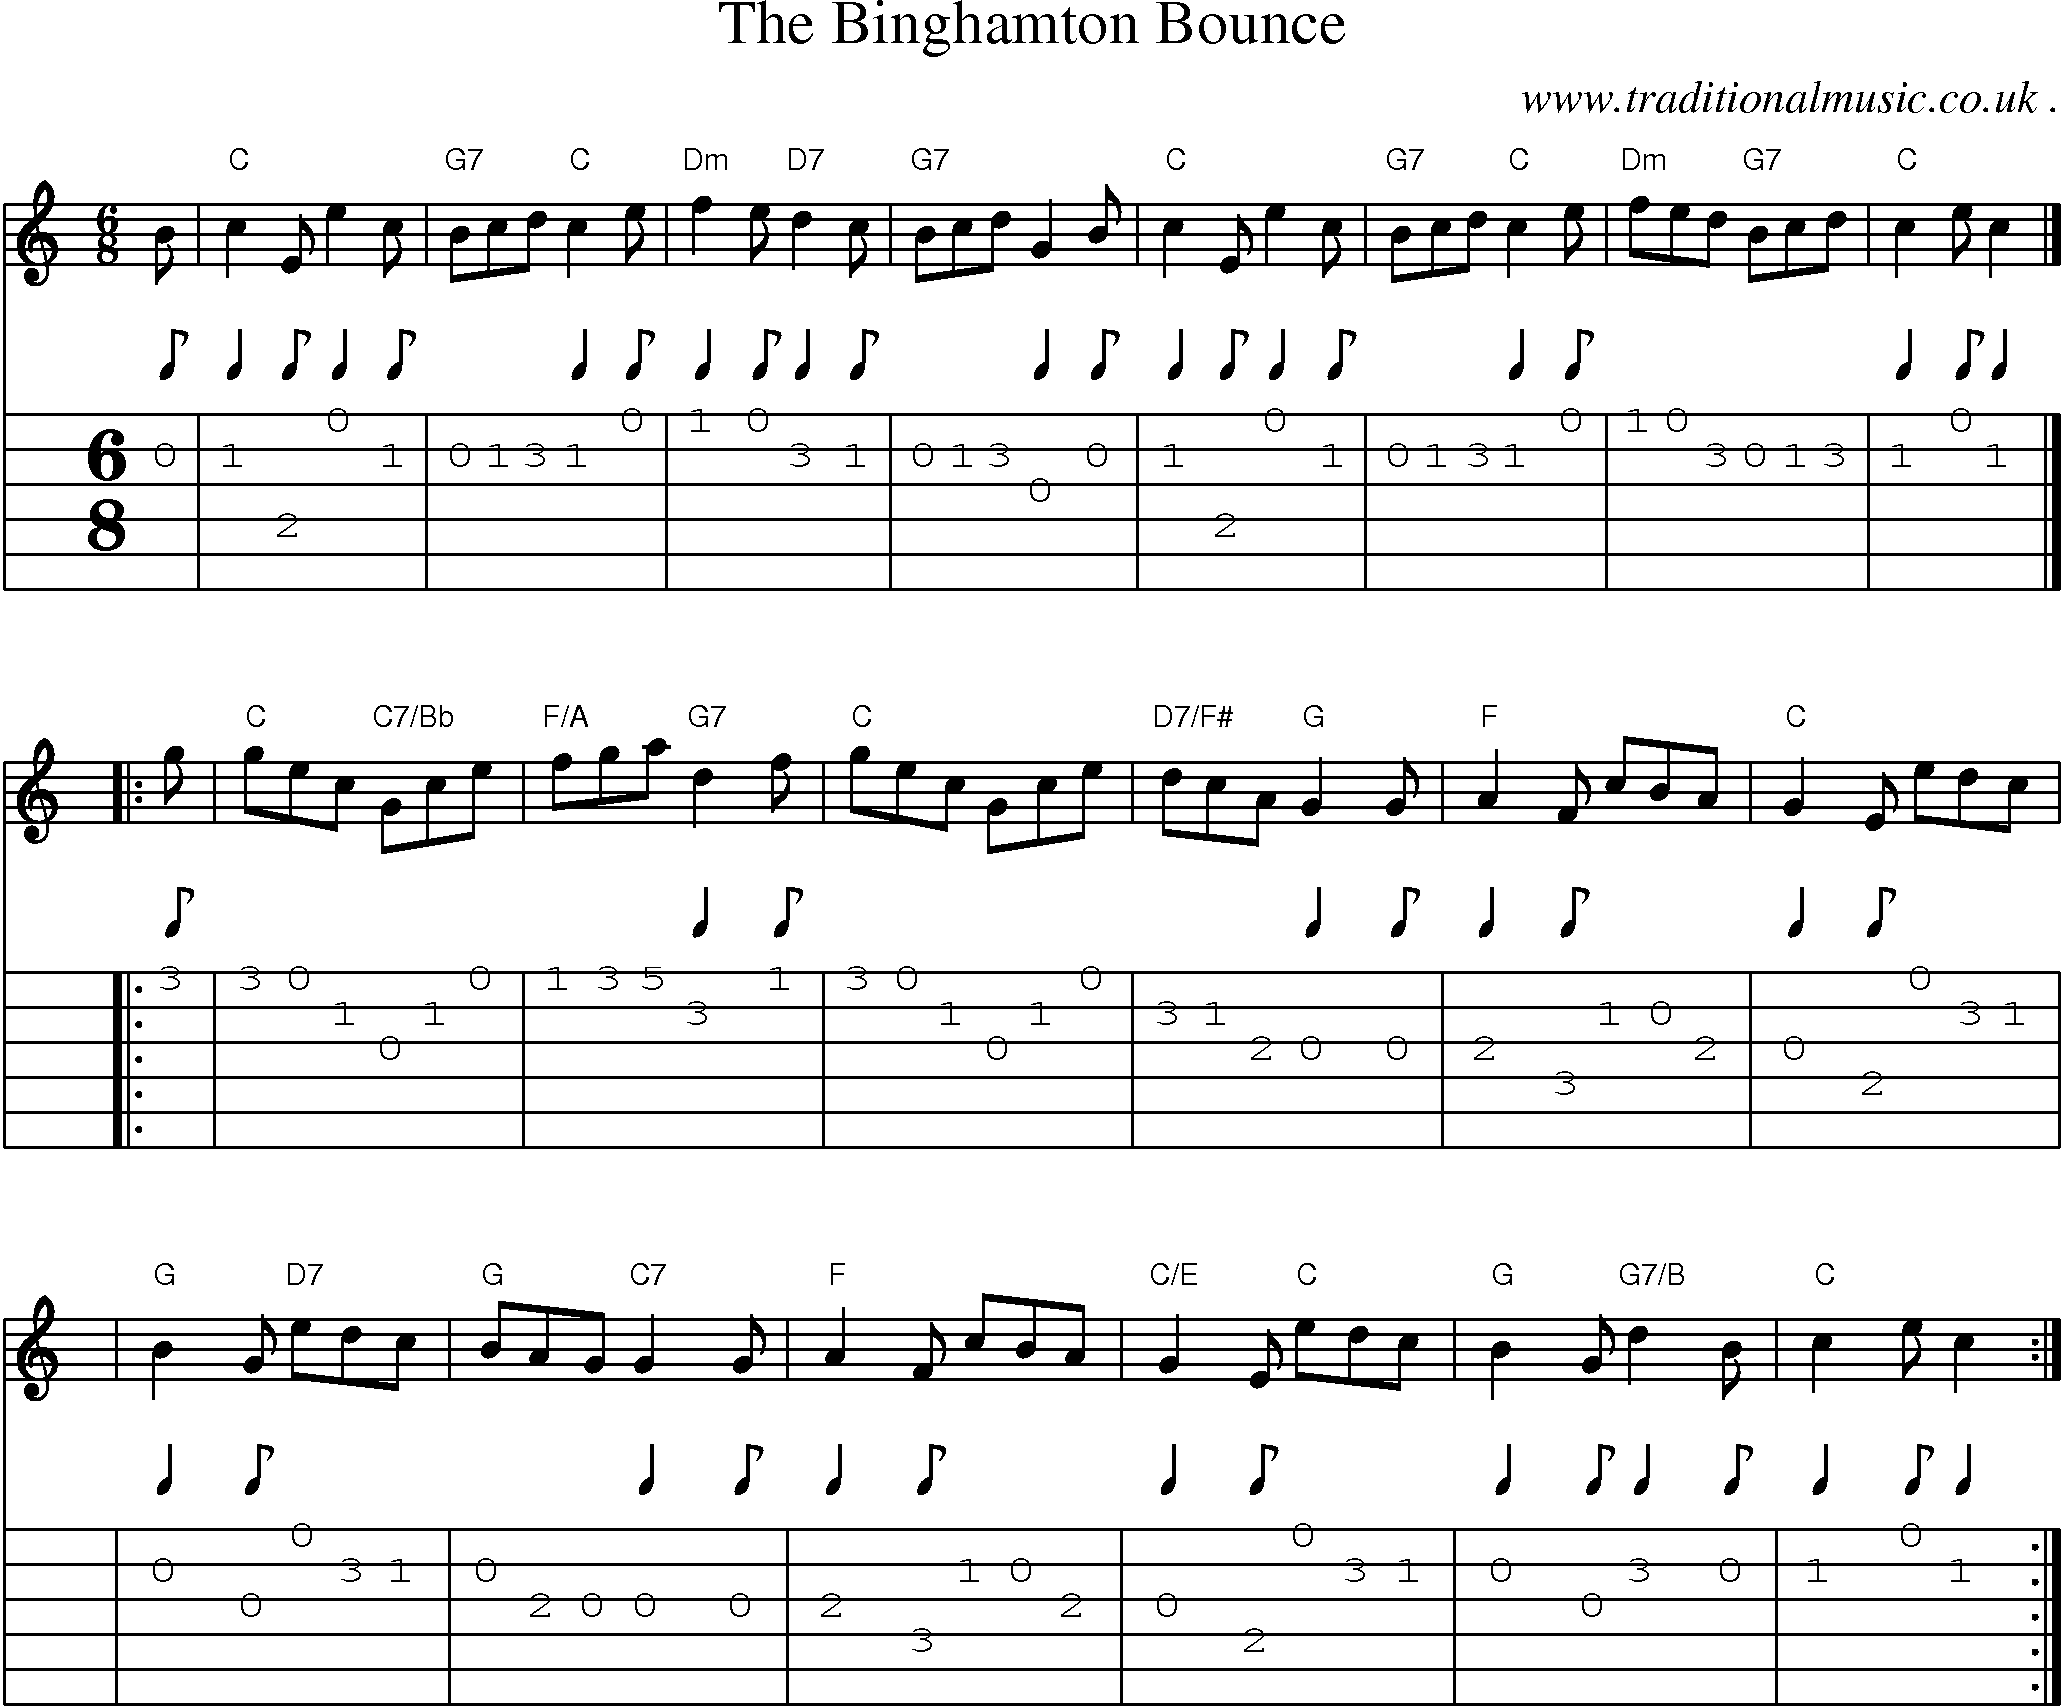 Sheet-music  score, Chords and Guitar Tabs for The Binghamton Bounce